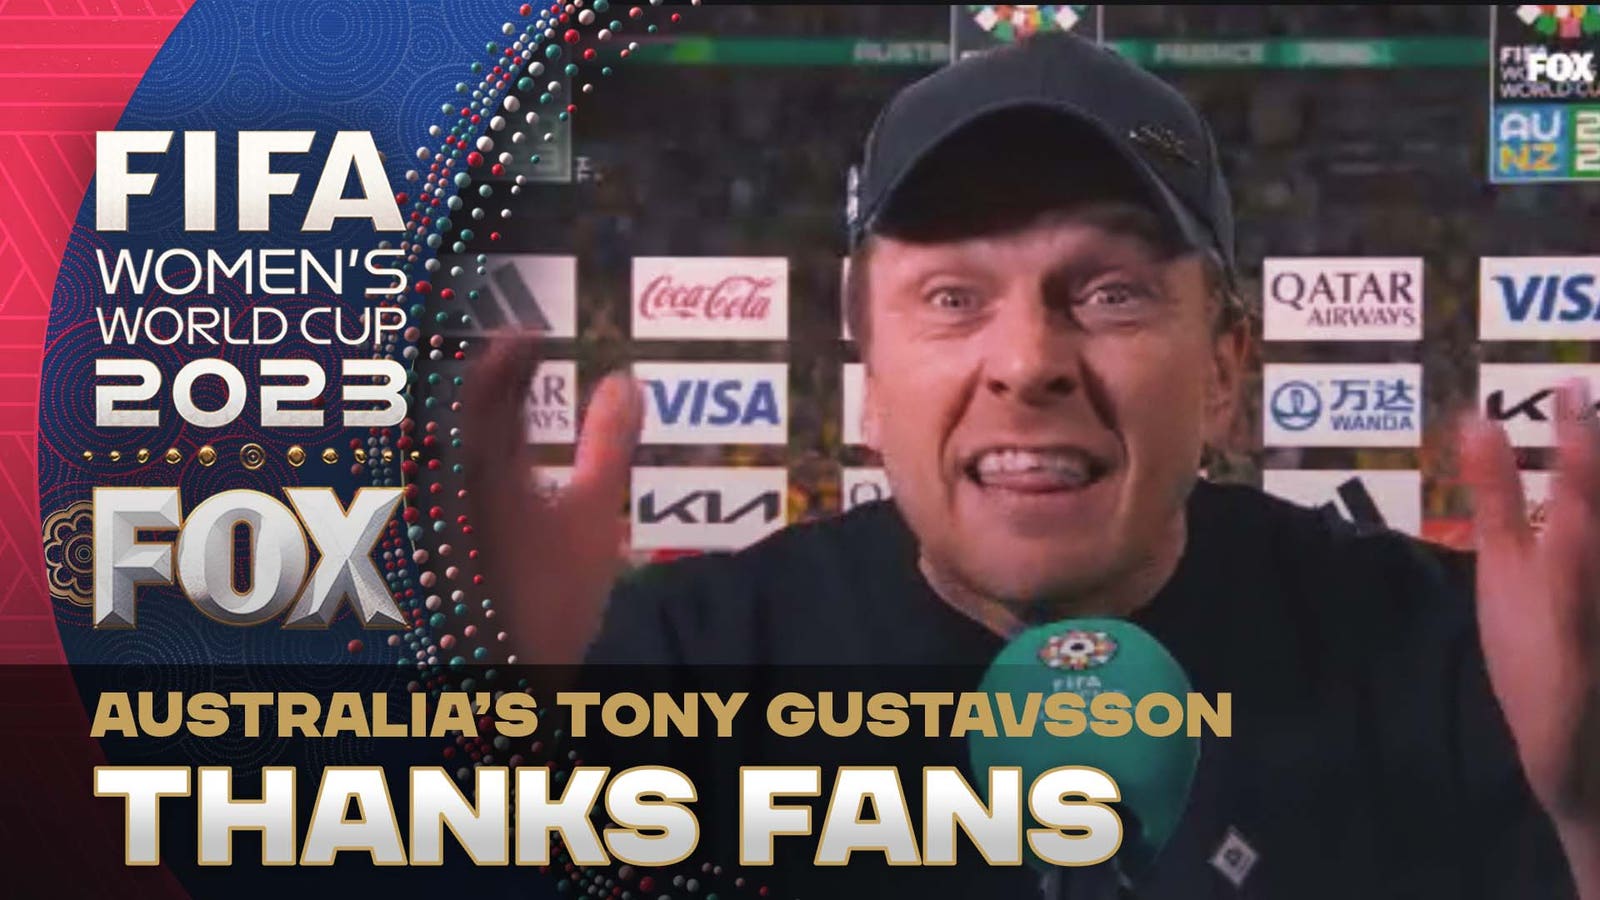 "You are a part of this win" — Australia coach Tony Gustavsson thanks fans